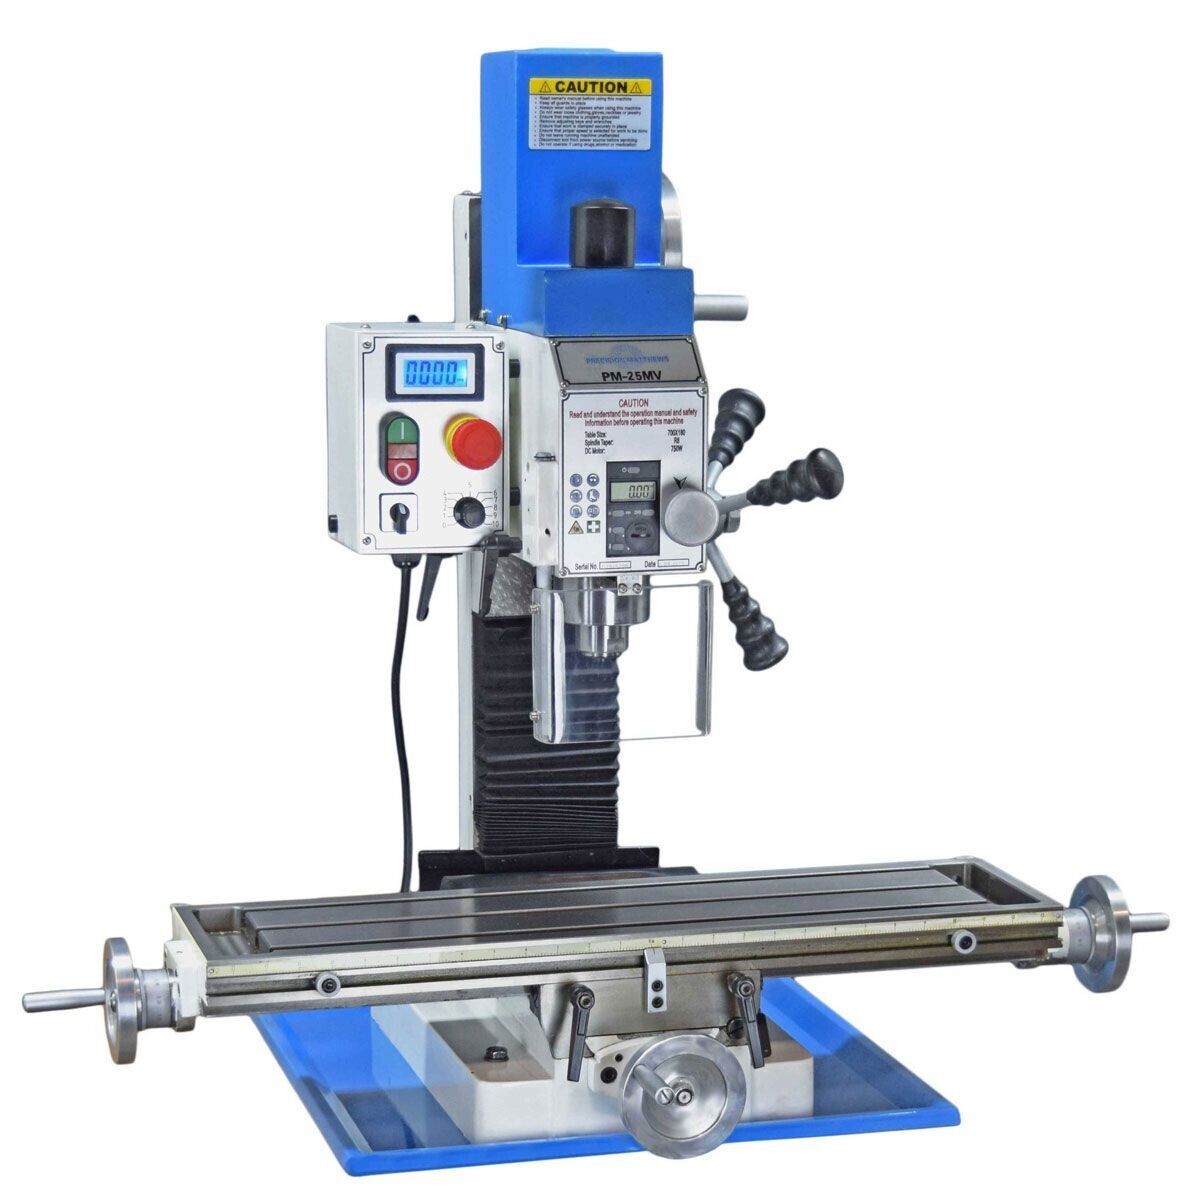 PM-25MV Precision Benchtop Milling Machine with 3-Axis DRO 